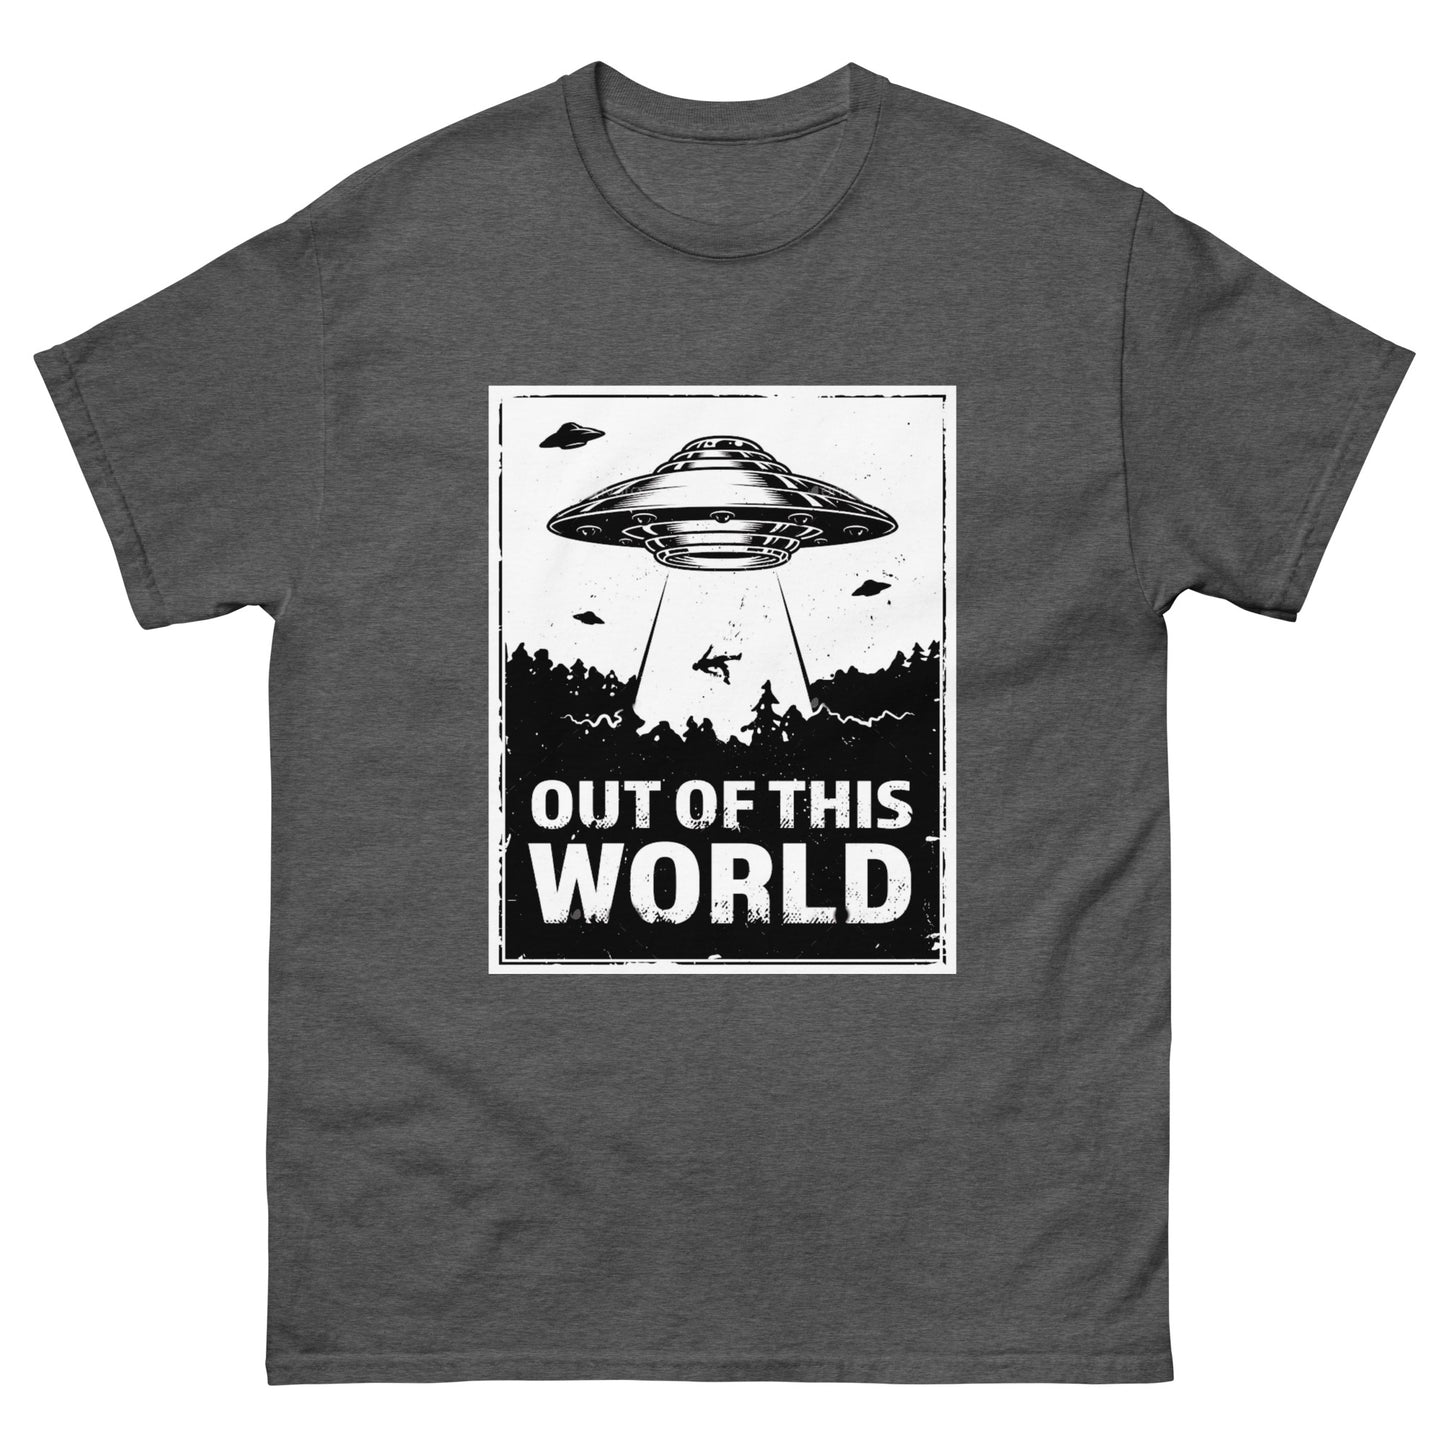 Out of this World T-Shirt